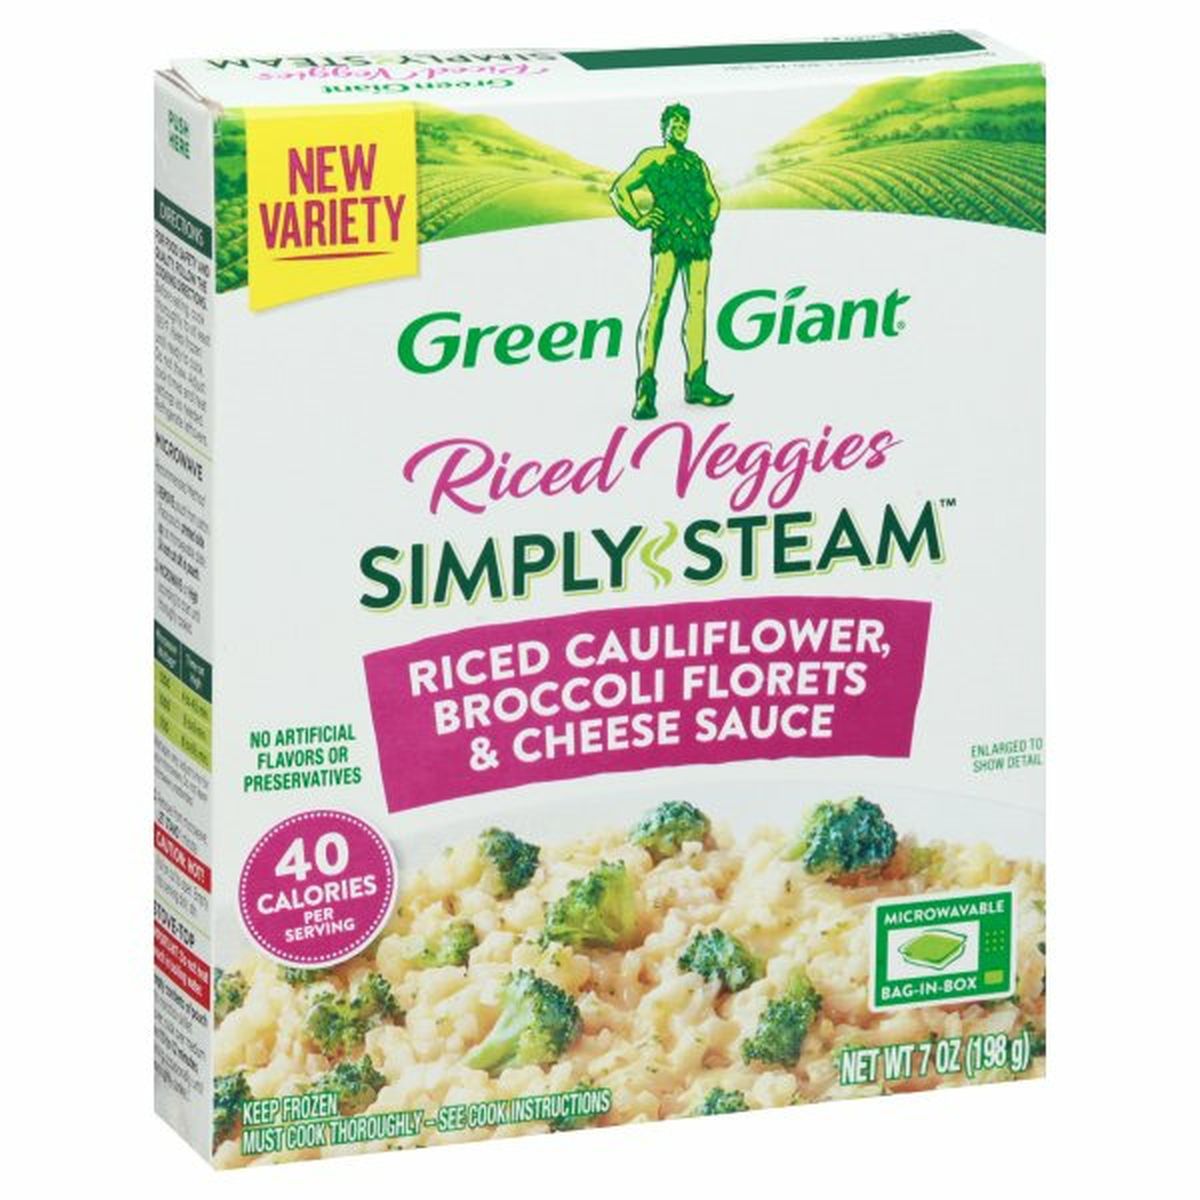 Calories in Green Giant Simply Steam Riced Veggies, Riced Cauliflower, Broccoli Florets & Cheese Sauce